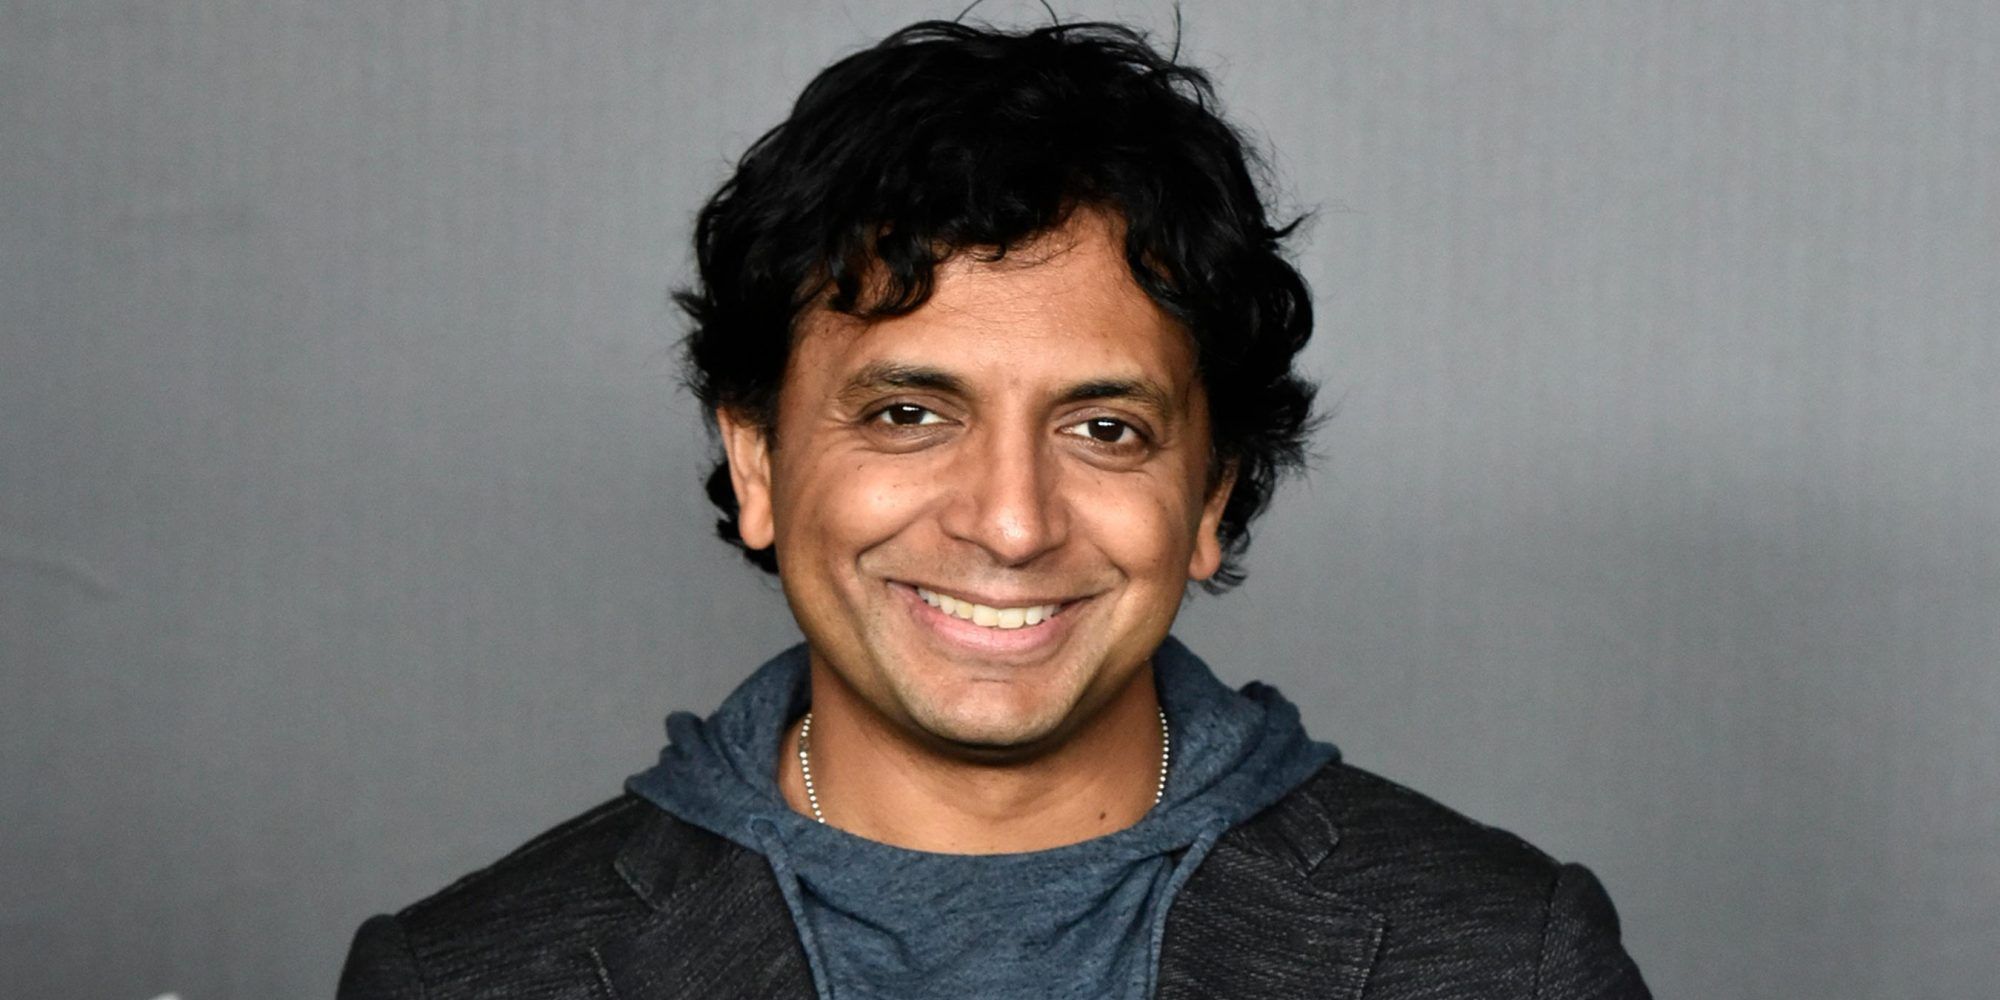 Director, Producer and Actor M Night Shyamalan